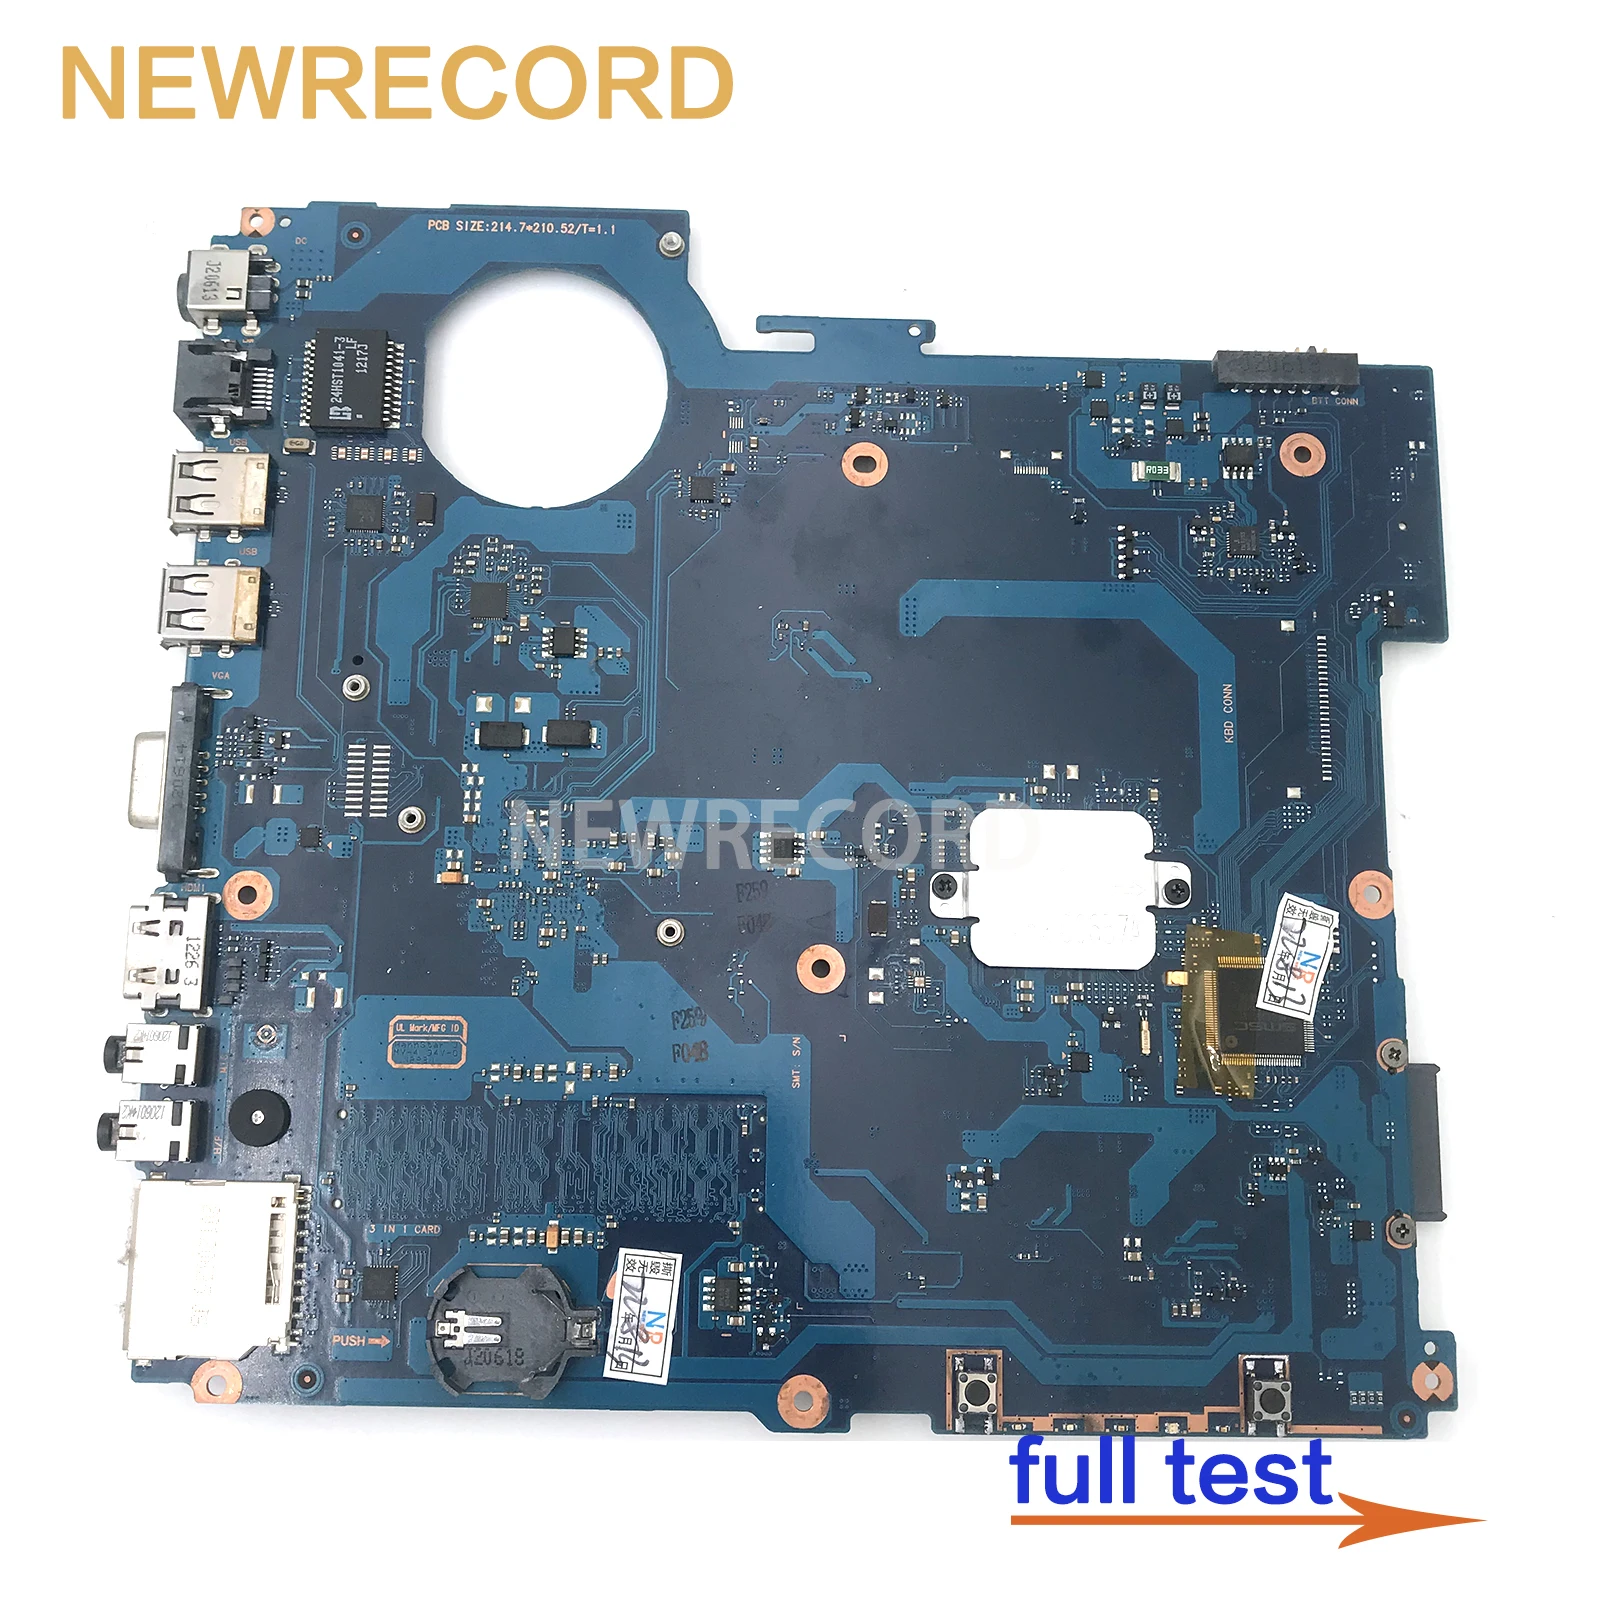 NEWRECORD For Samsung RV415 Laptop motherboard mainboard DDR3 BA92-09438A BA41-01648A With CPU main board full test enlarge